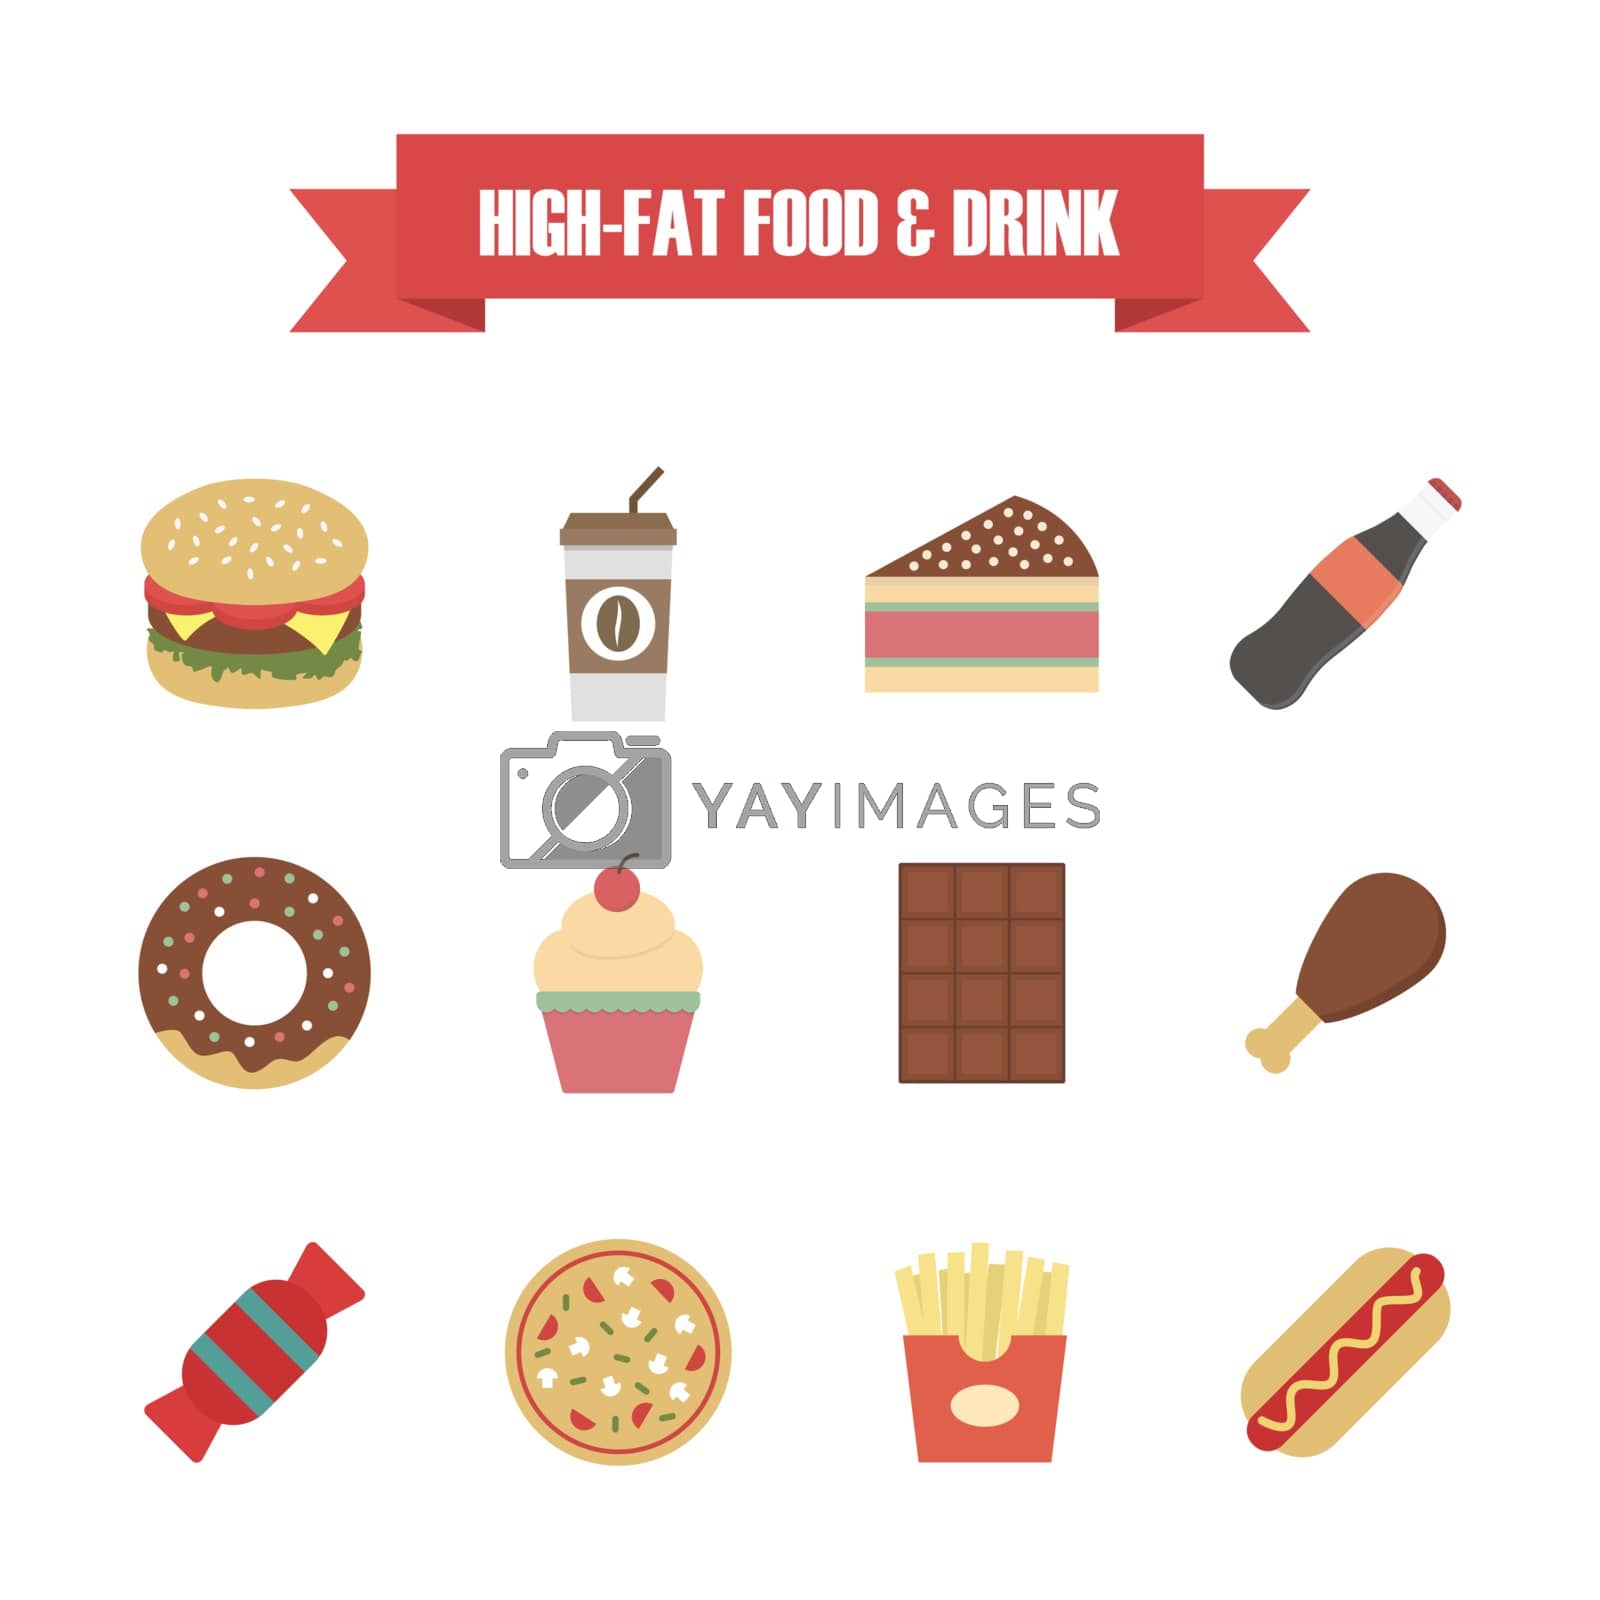 Royalty free image of junk food by zirconicusso